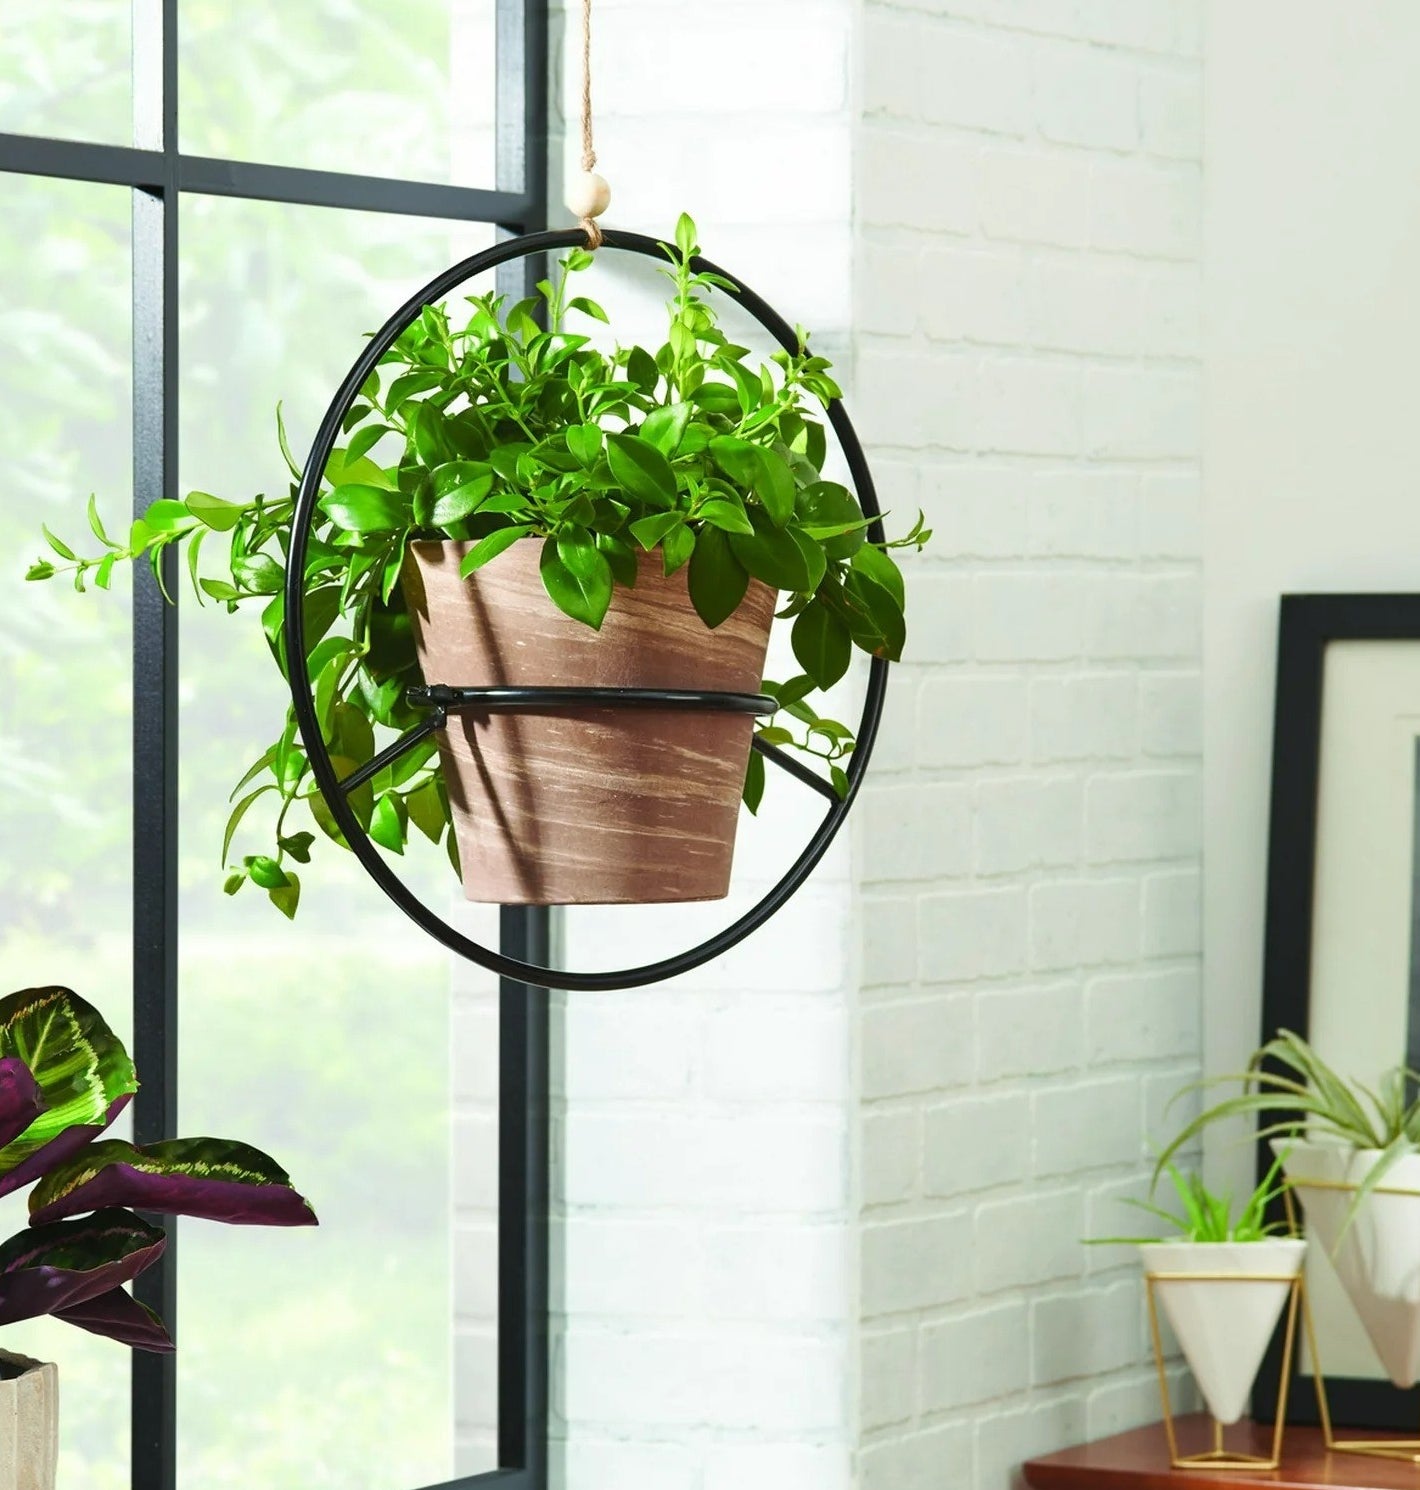 the circular black metal plant holder with a plant inside